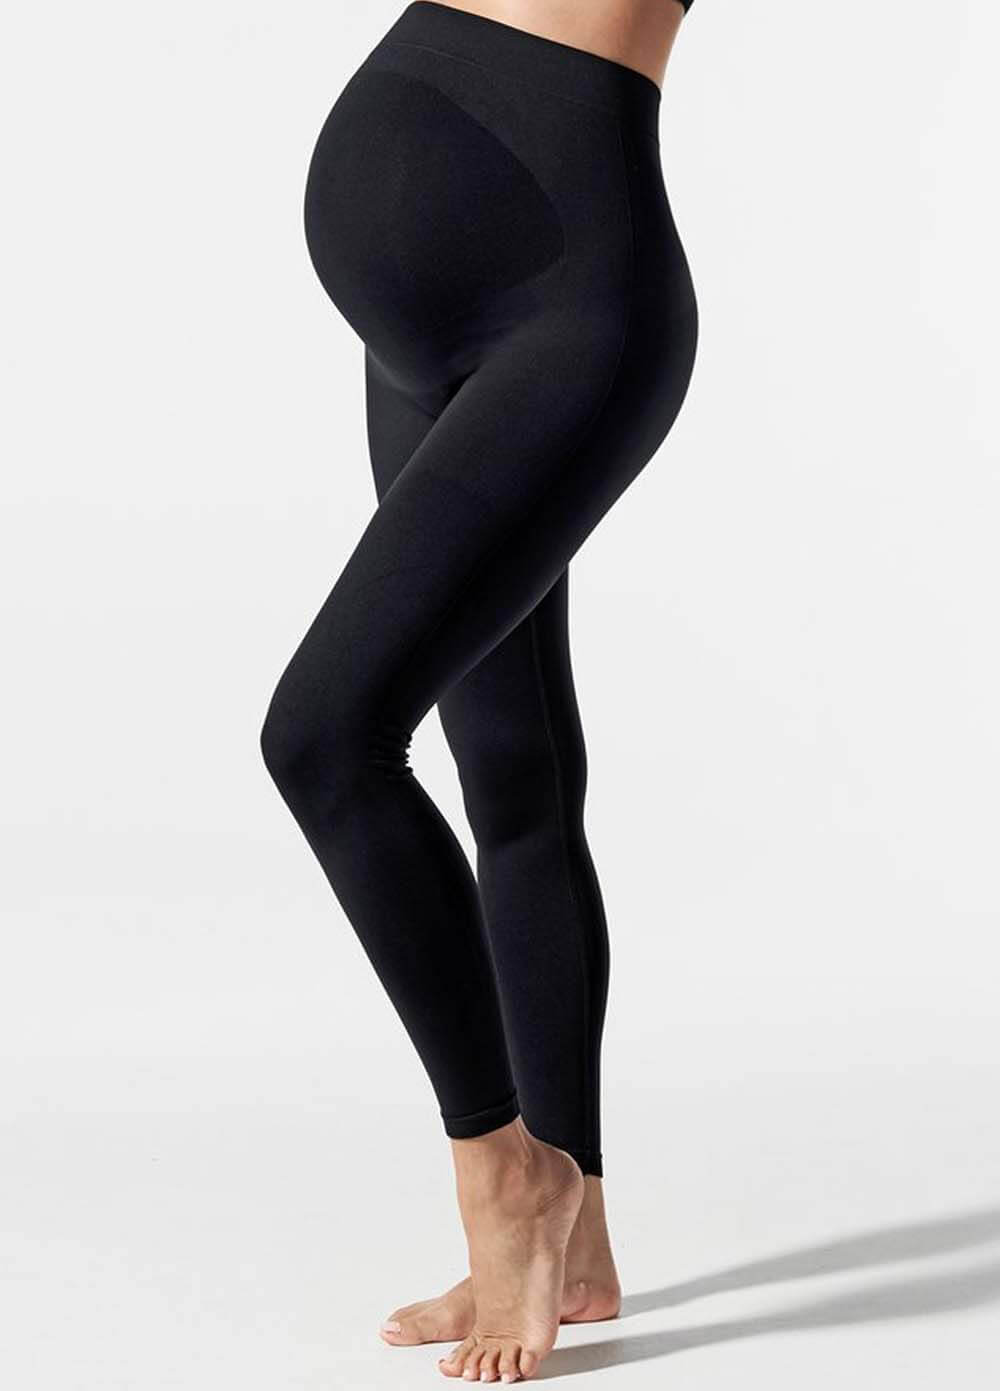 Belly Support Cotton Maternity Leggings